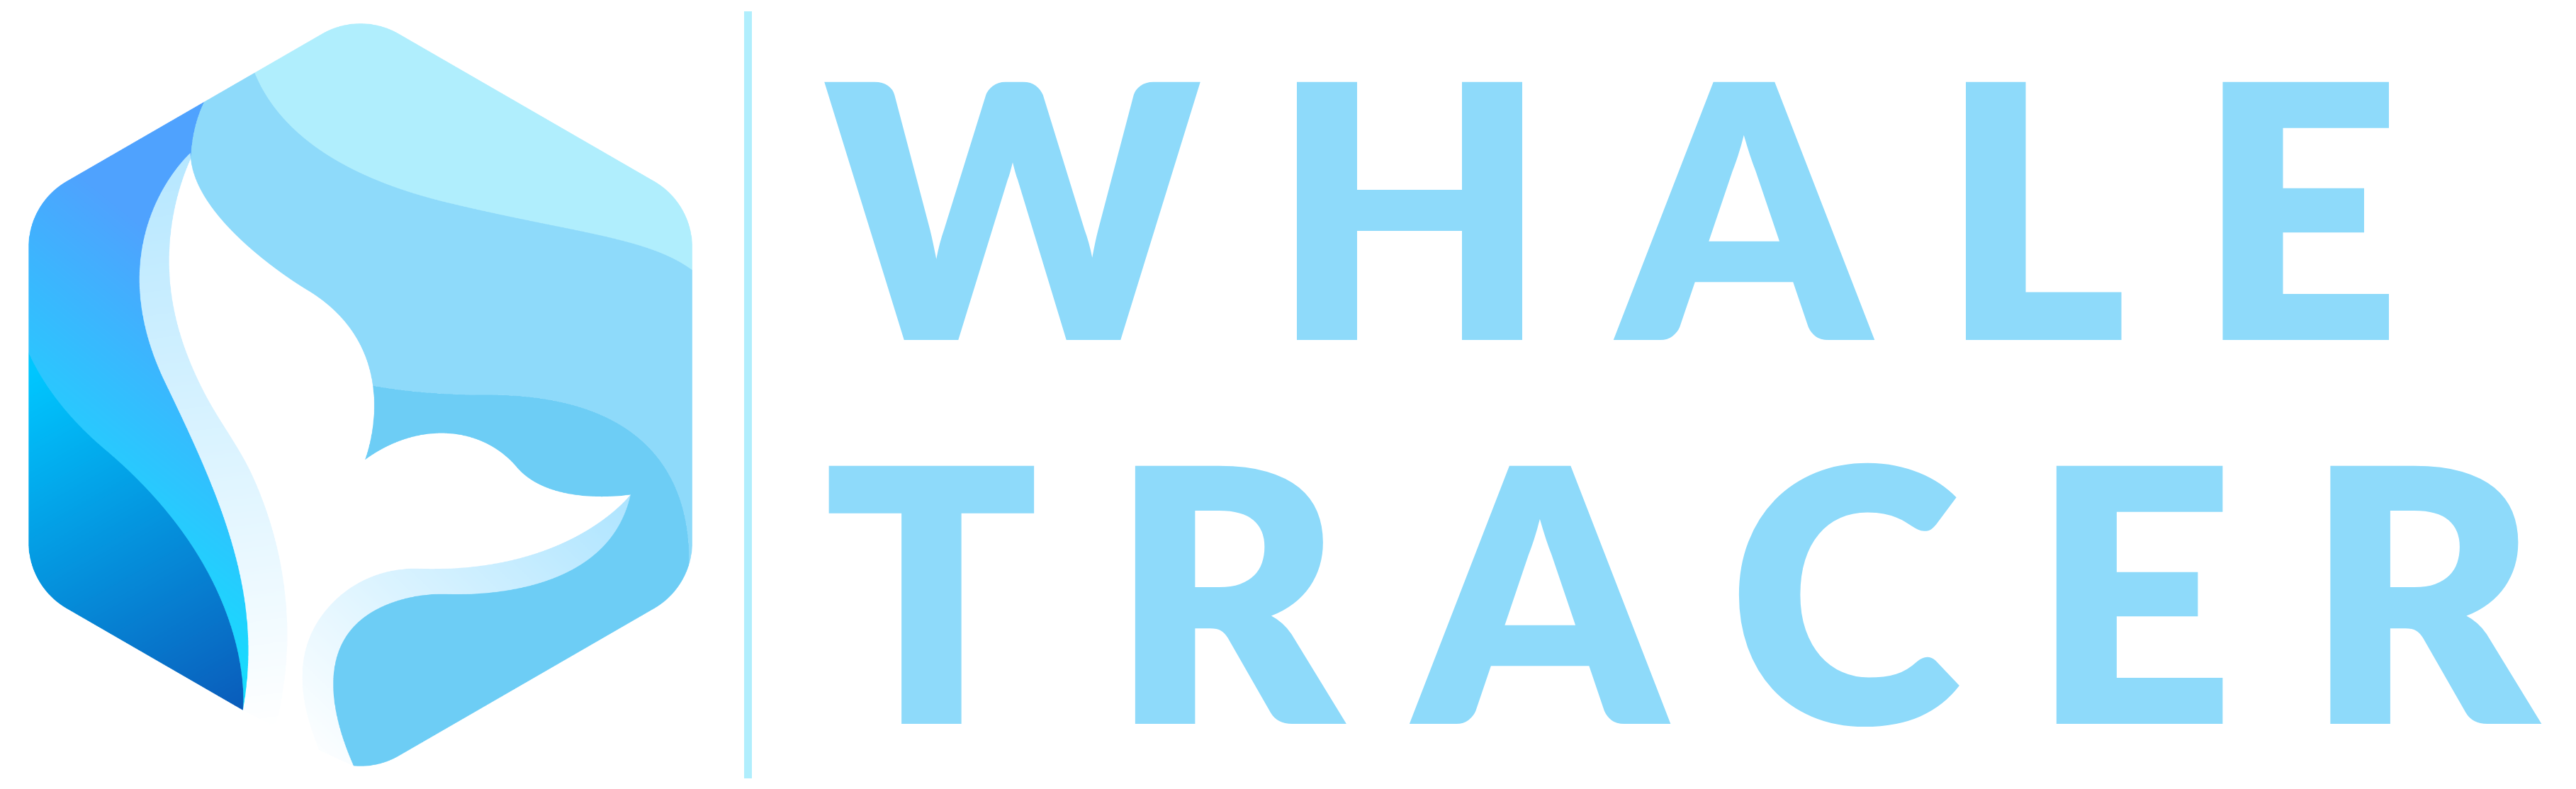 WhaleTracer